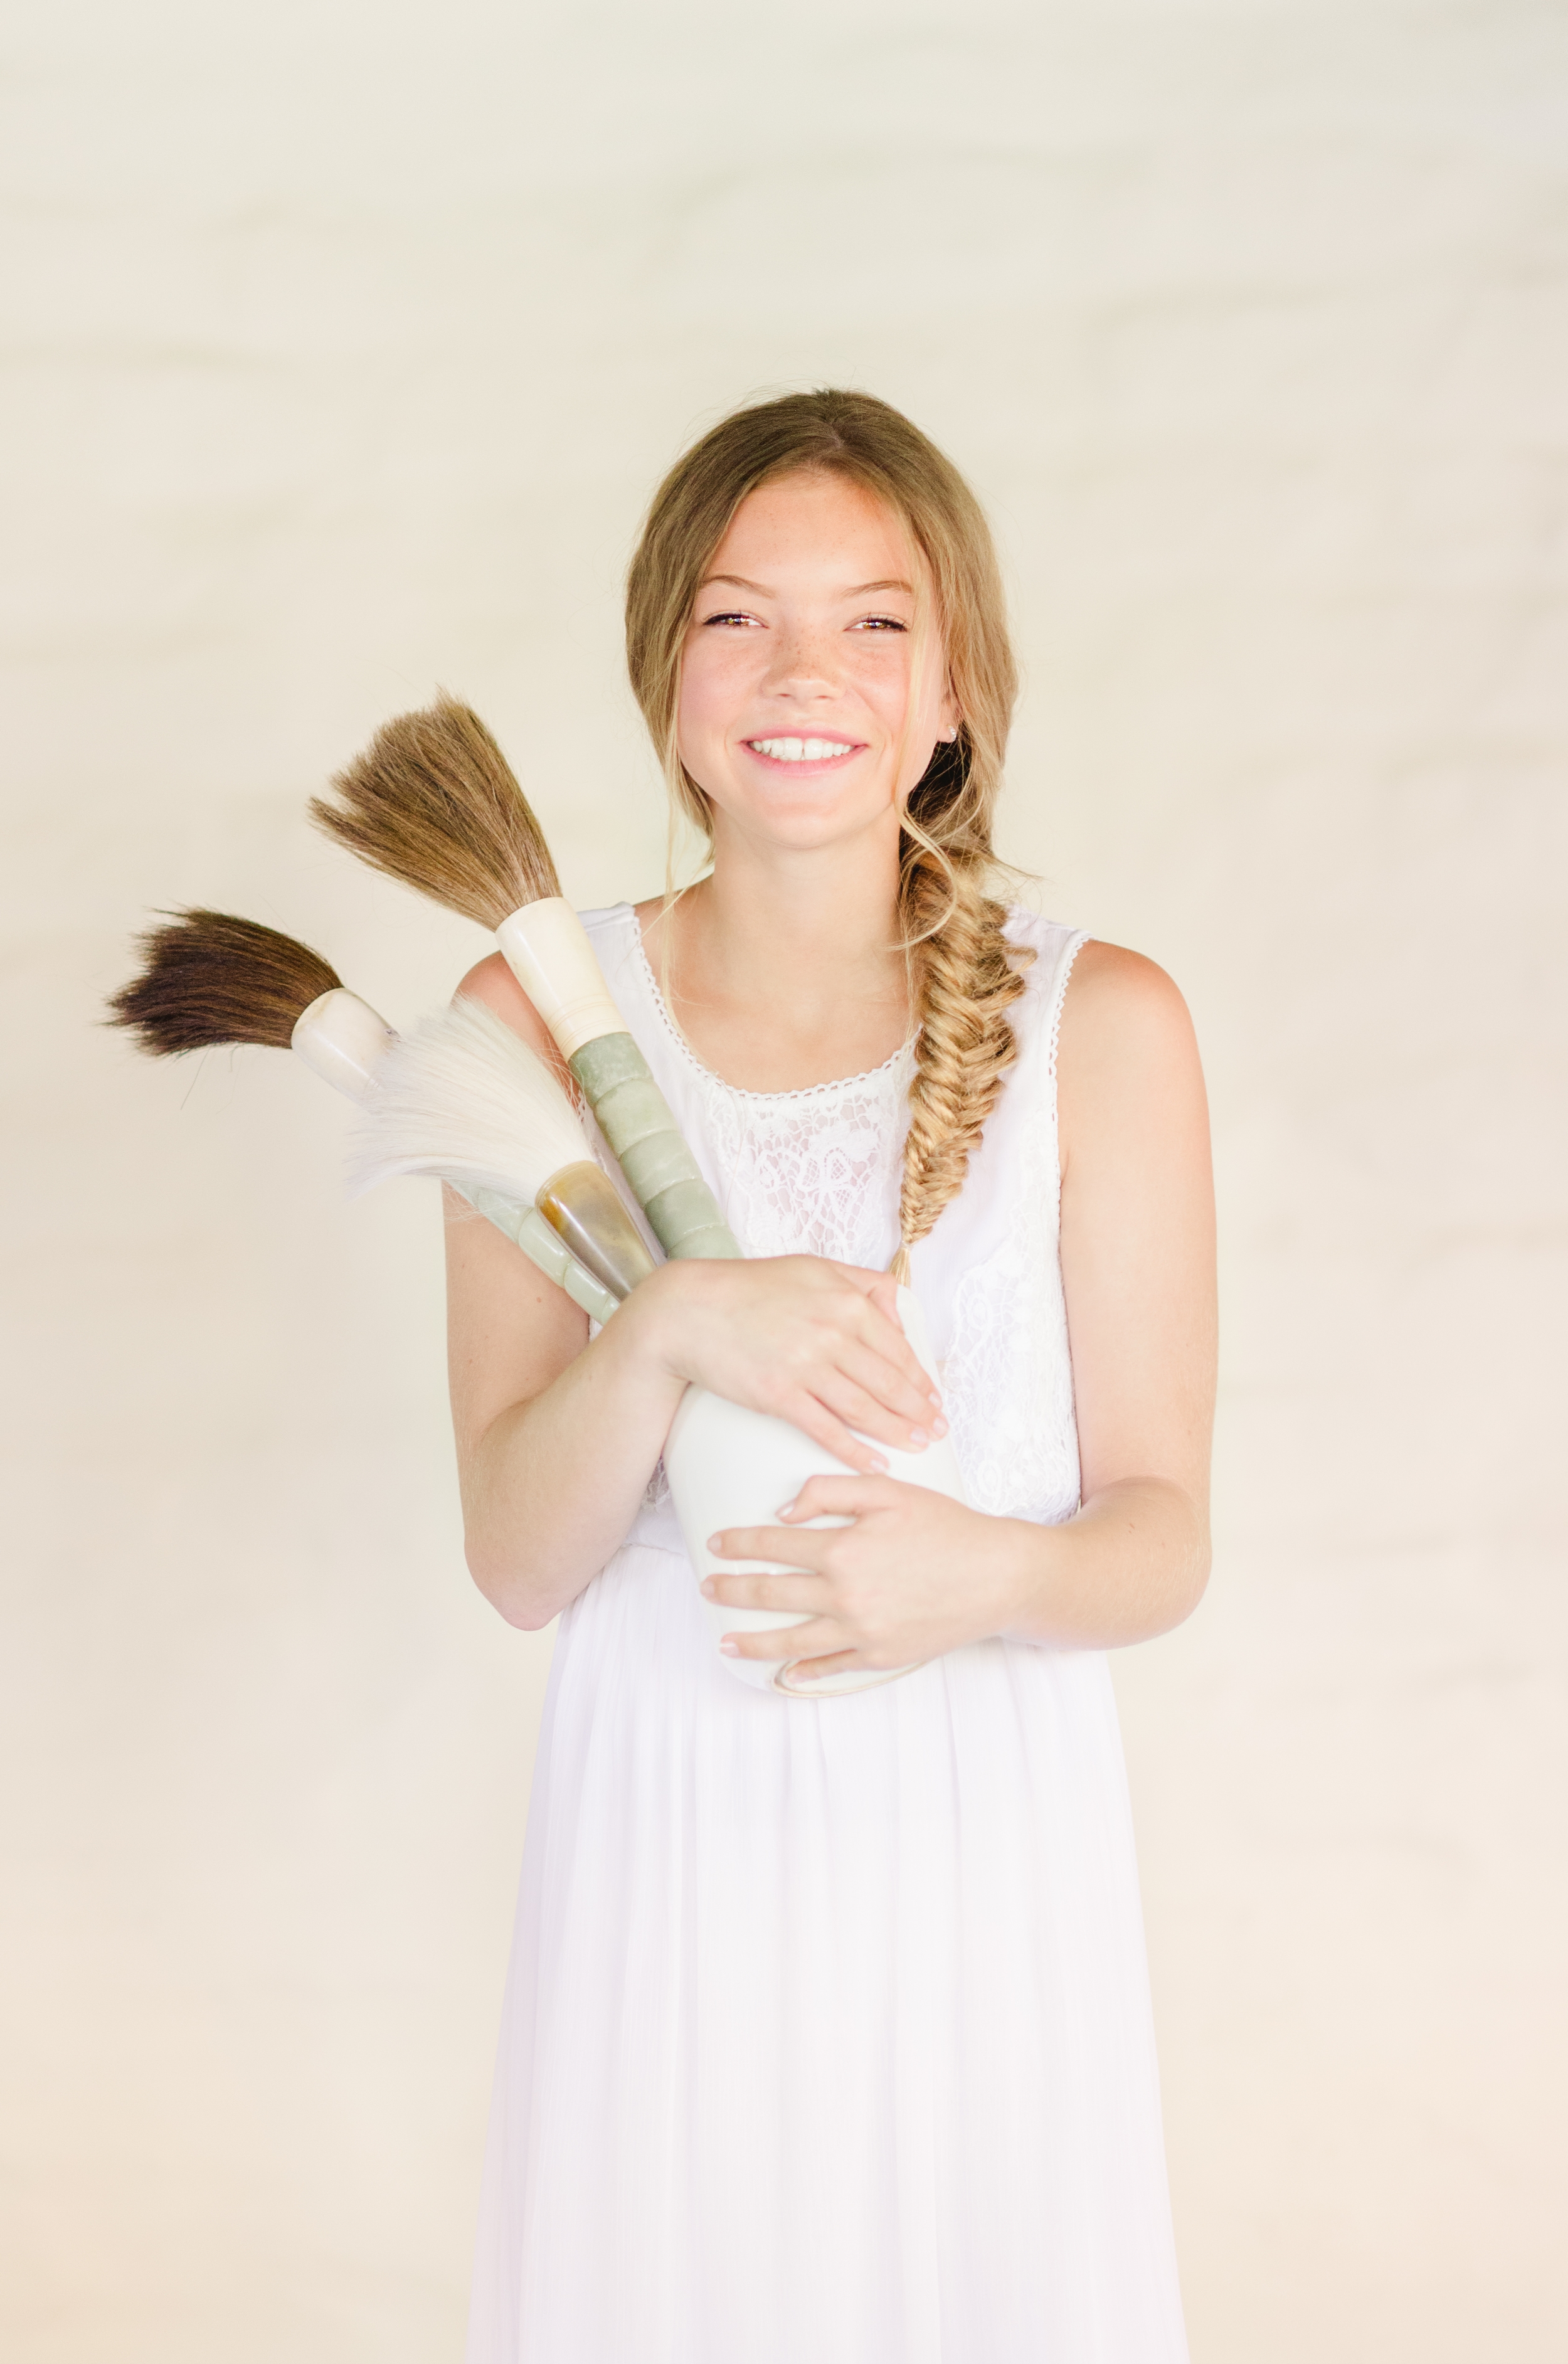 Many Brushes: Thoughts on Beauty by a Mother as Featured in Cottage Hill's The Pioneer Issue